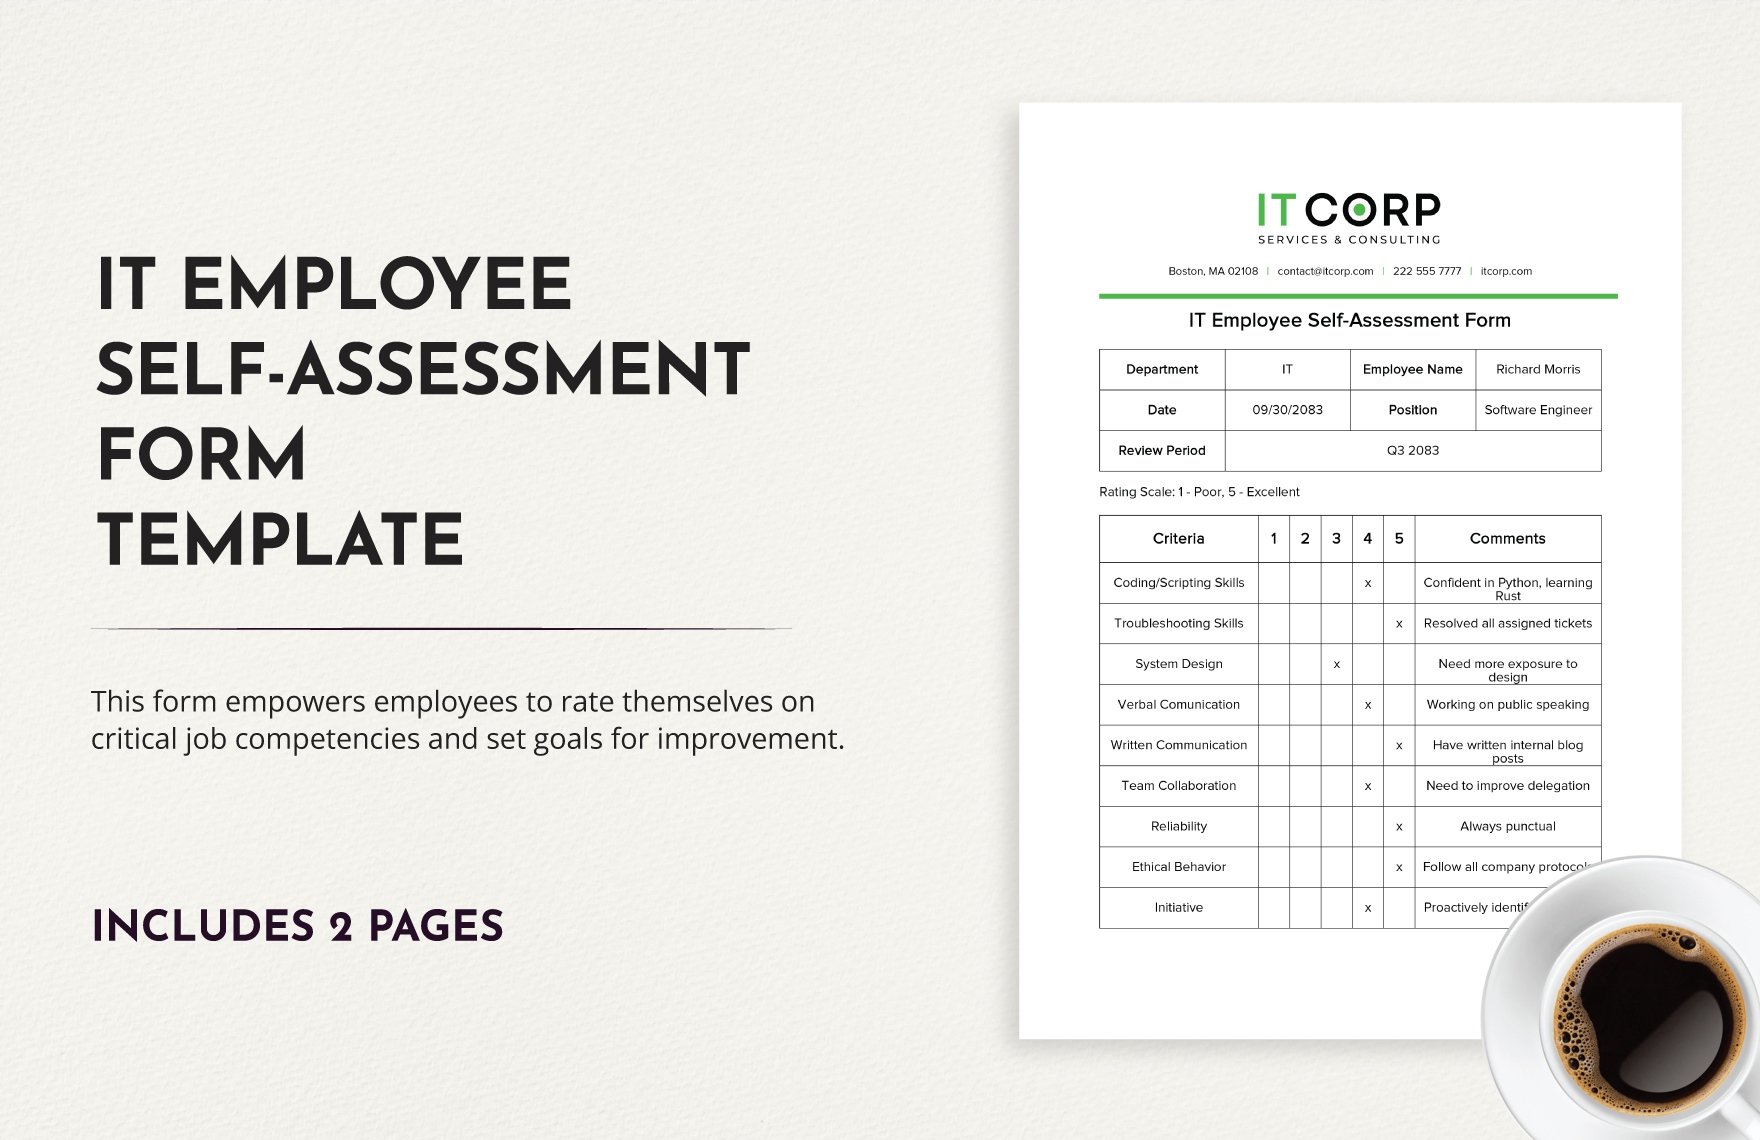 IT Employee Self-assessment Form Template in Word, Google Docs, PDF